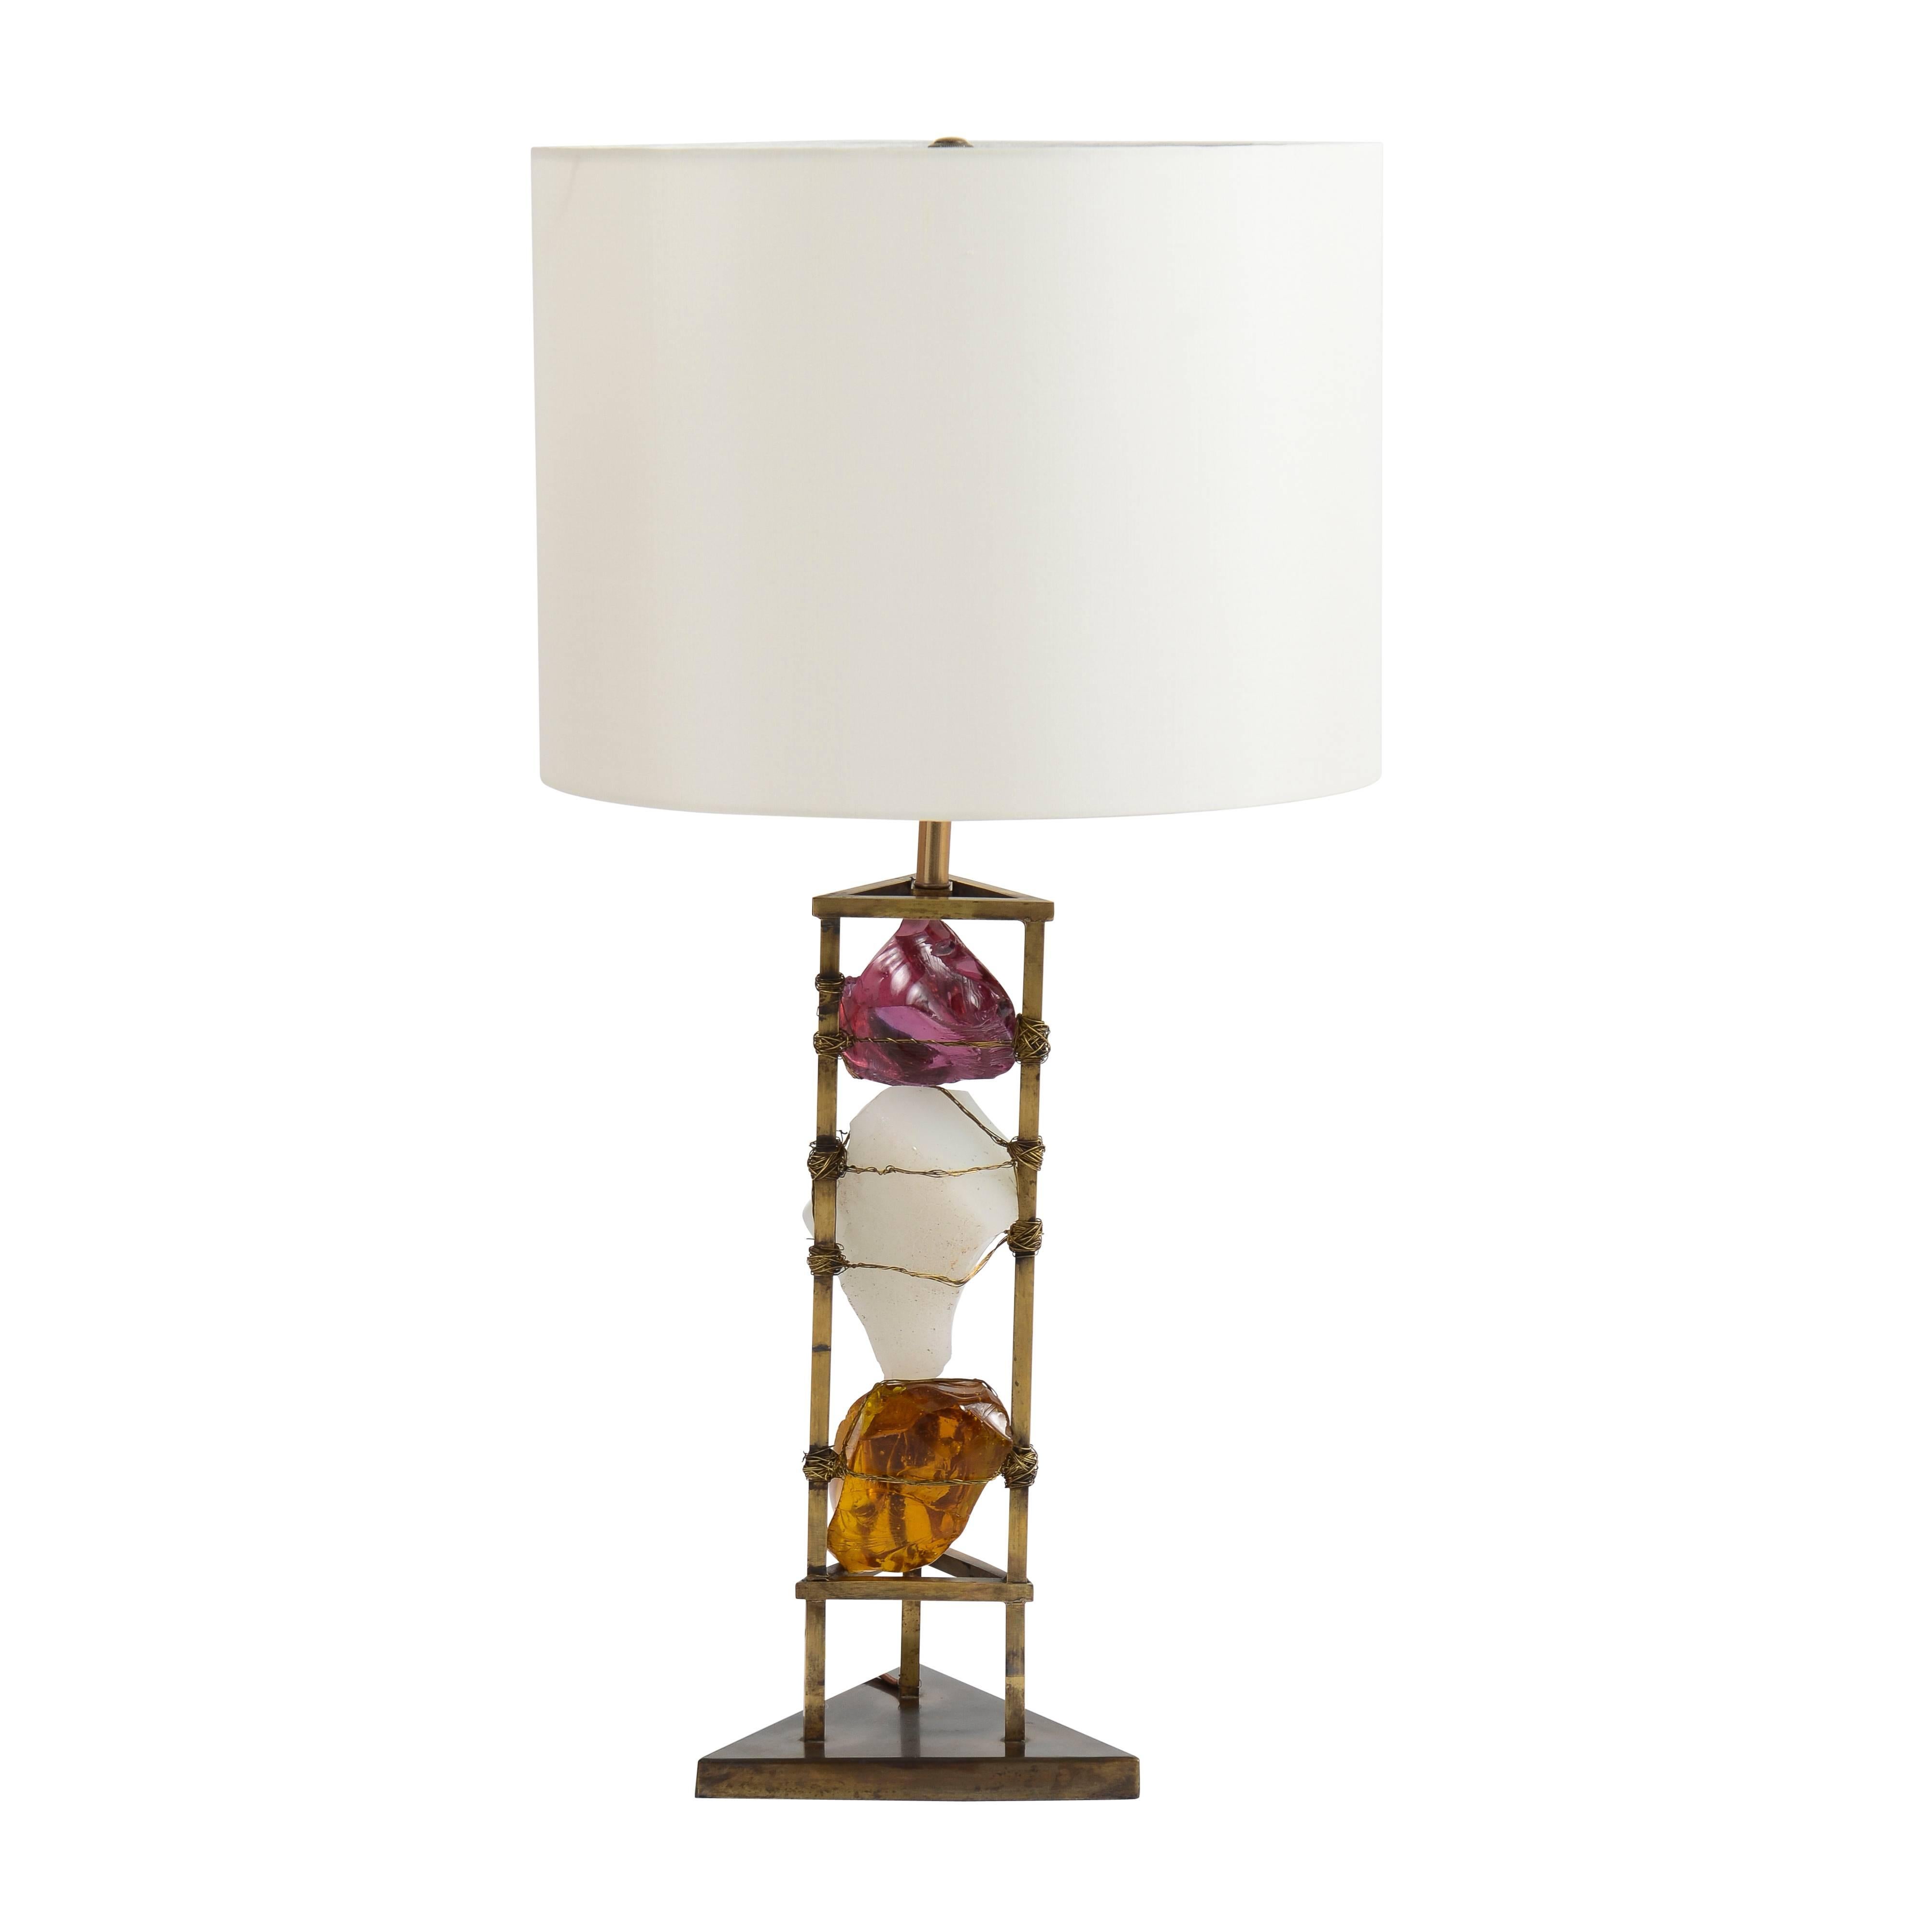 Pair of gem stone Brutalist table lamps in brass enclosure.